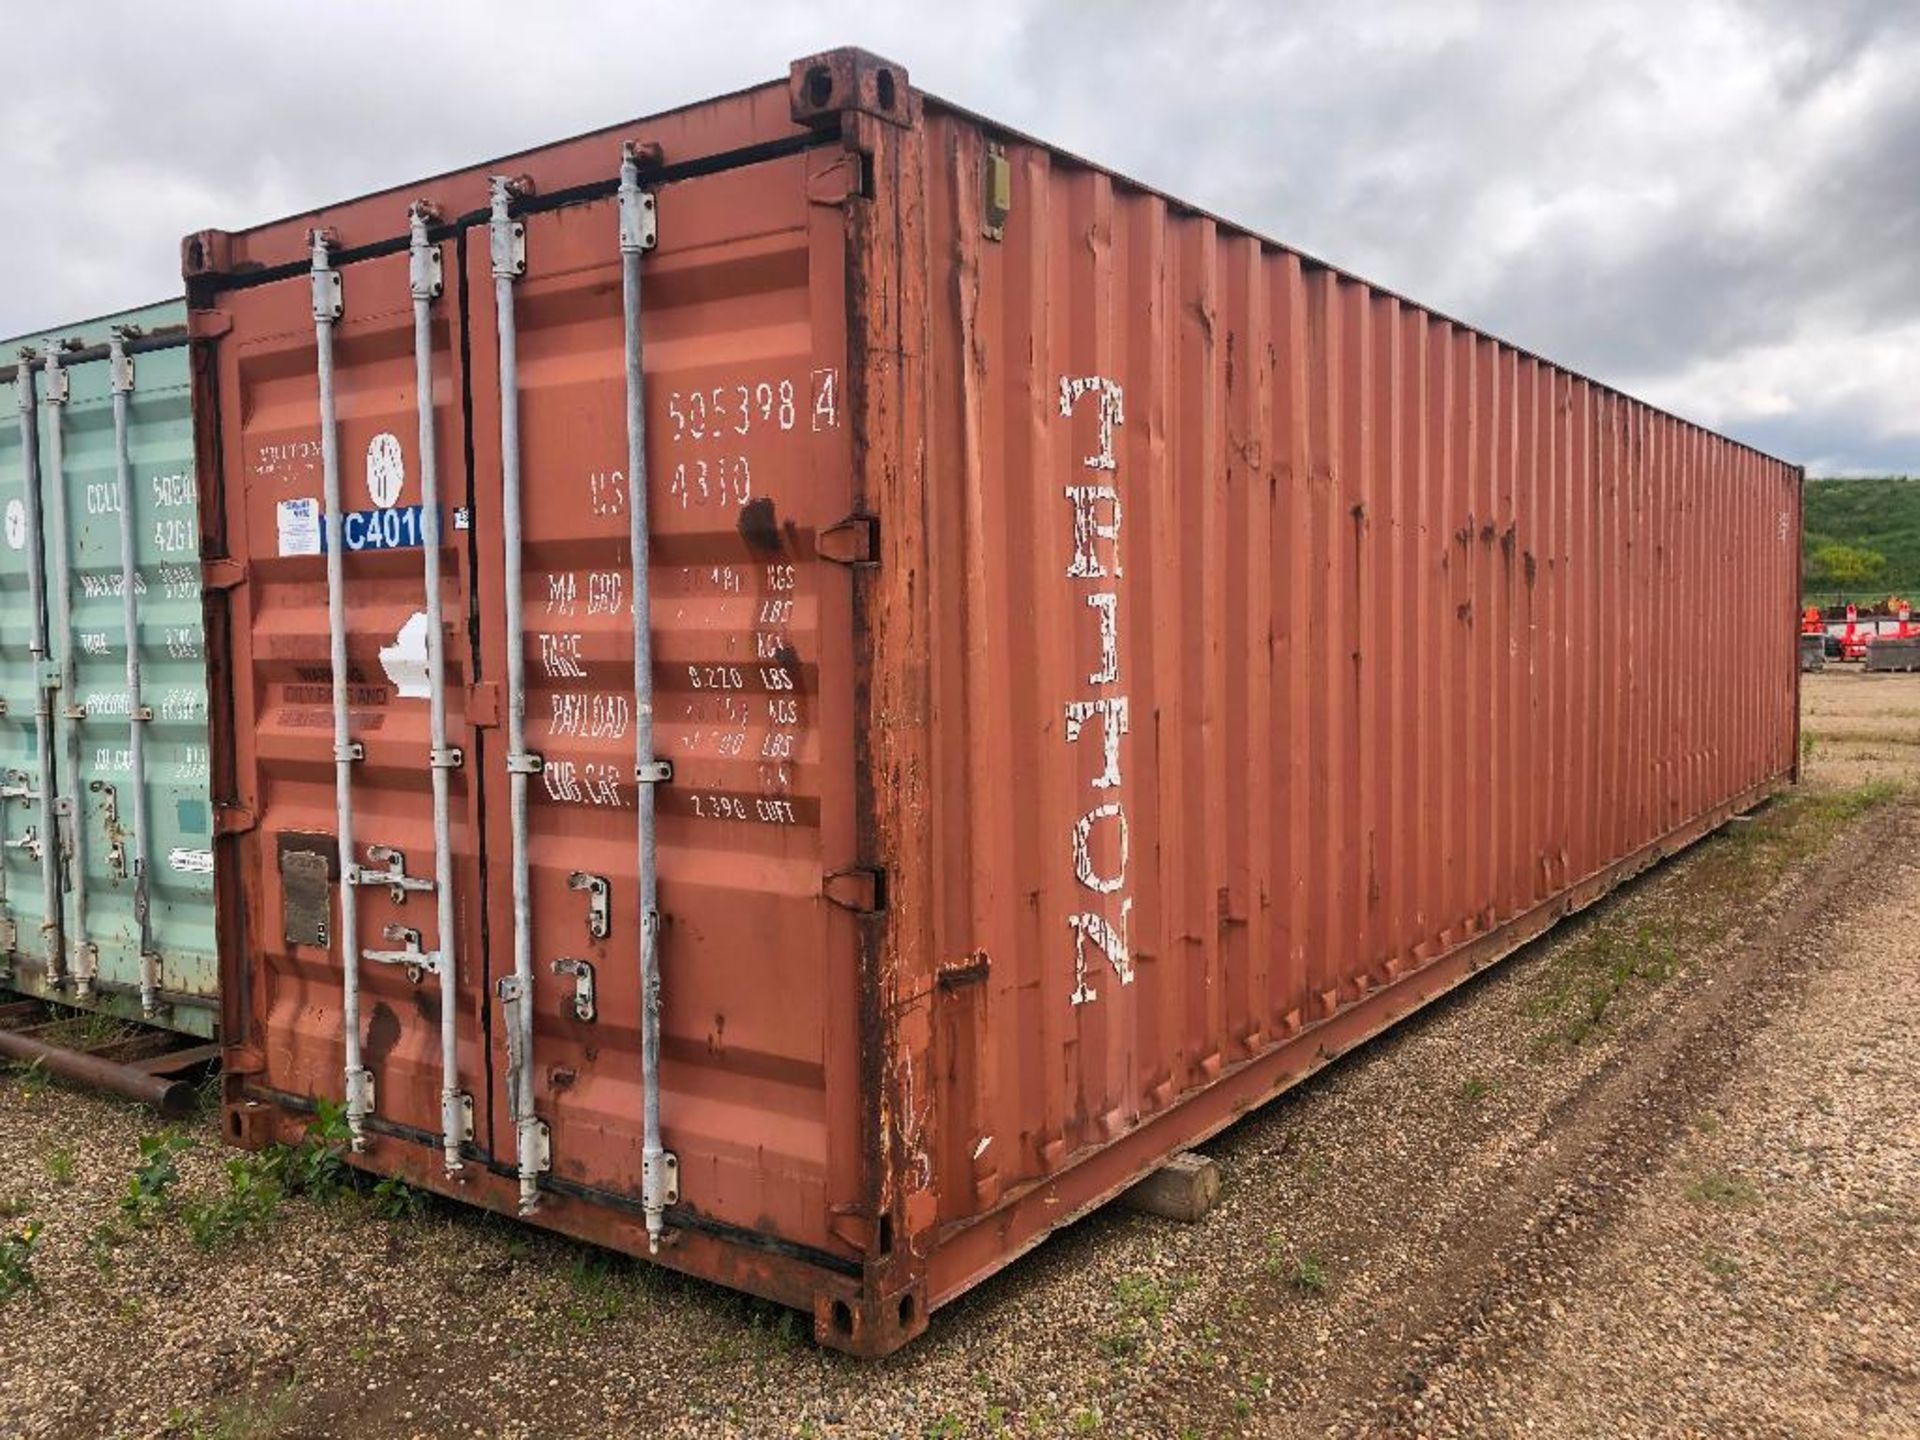 40' Sea Container (Cannot Be Removed Until July 16th to allow for removal of contents)